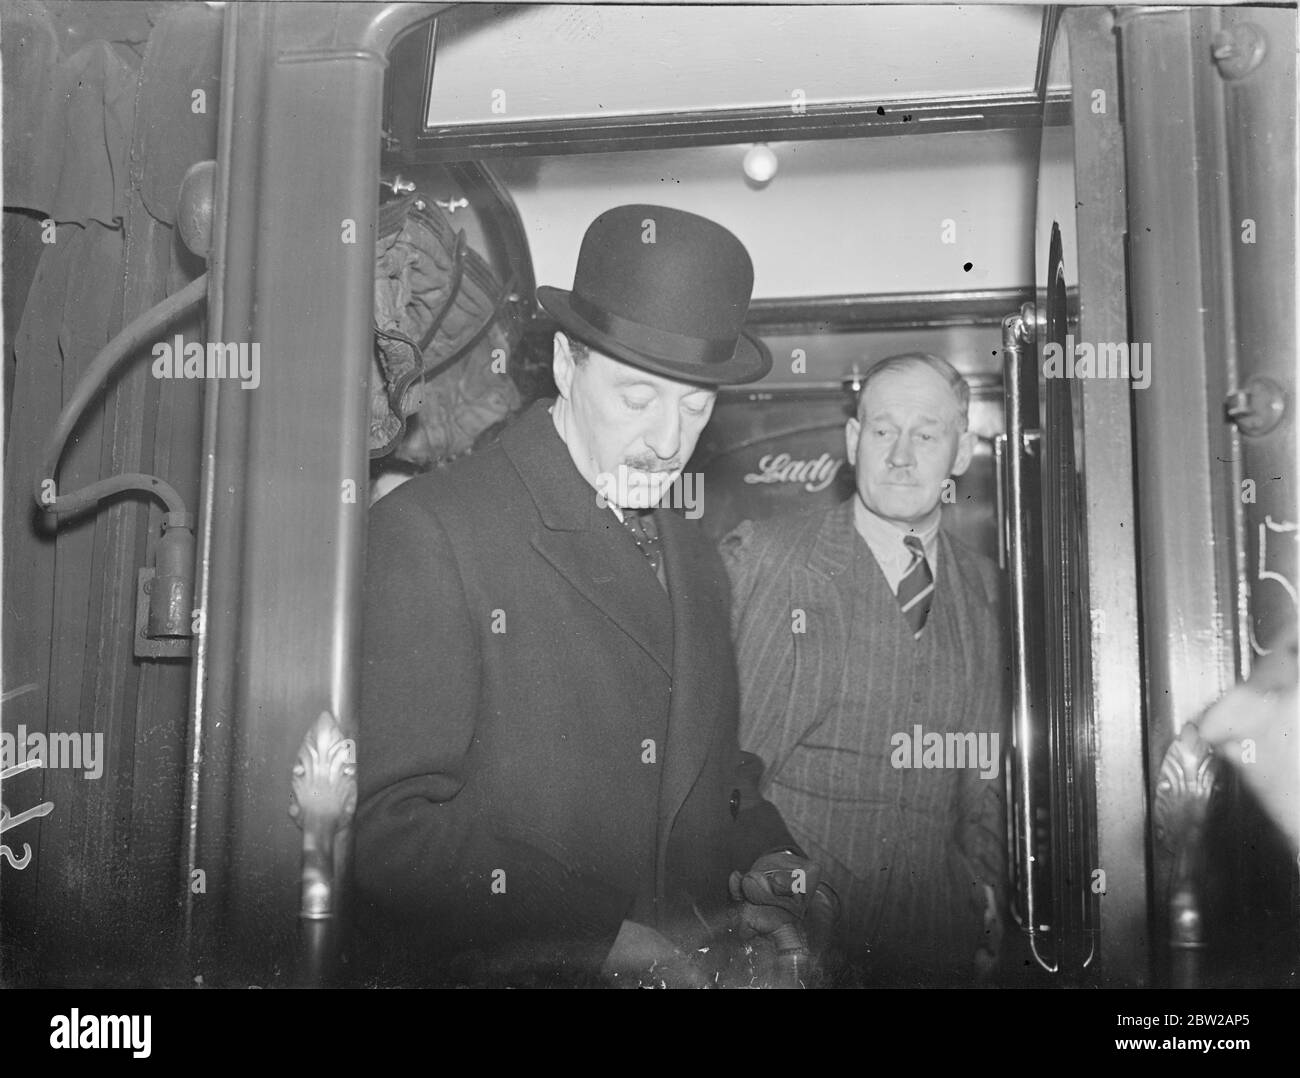 Air Chief leaves to inspect Empire bases-Hong Kong included. As Britain's note on Hong Kong was presented to Japan, Sir Edward I Ellington, Marshal of the Royal Air Force, left Victoria station, London, on a tour of inspection of the RAF stations in the Near and Far East. Sir Edward, who is Inspector General of the RAF, is accompanied by Squadron leader R R Nash, personal assistant. Photo shows, Sir Edward Ellington (right) with Air Chief Marshal Sir Cyril Newell., Chief of Air Staff, who saw him off at Victoria. 23 December 1937 Stock Photo